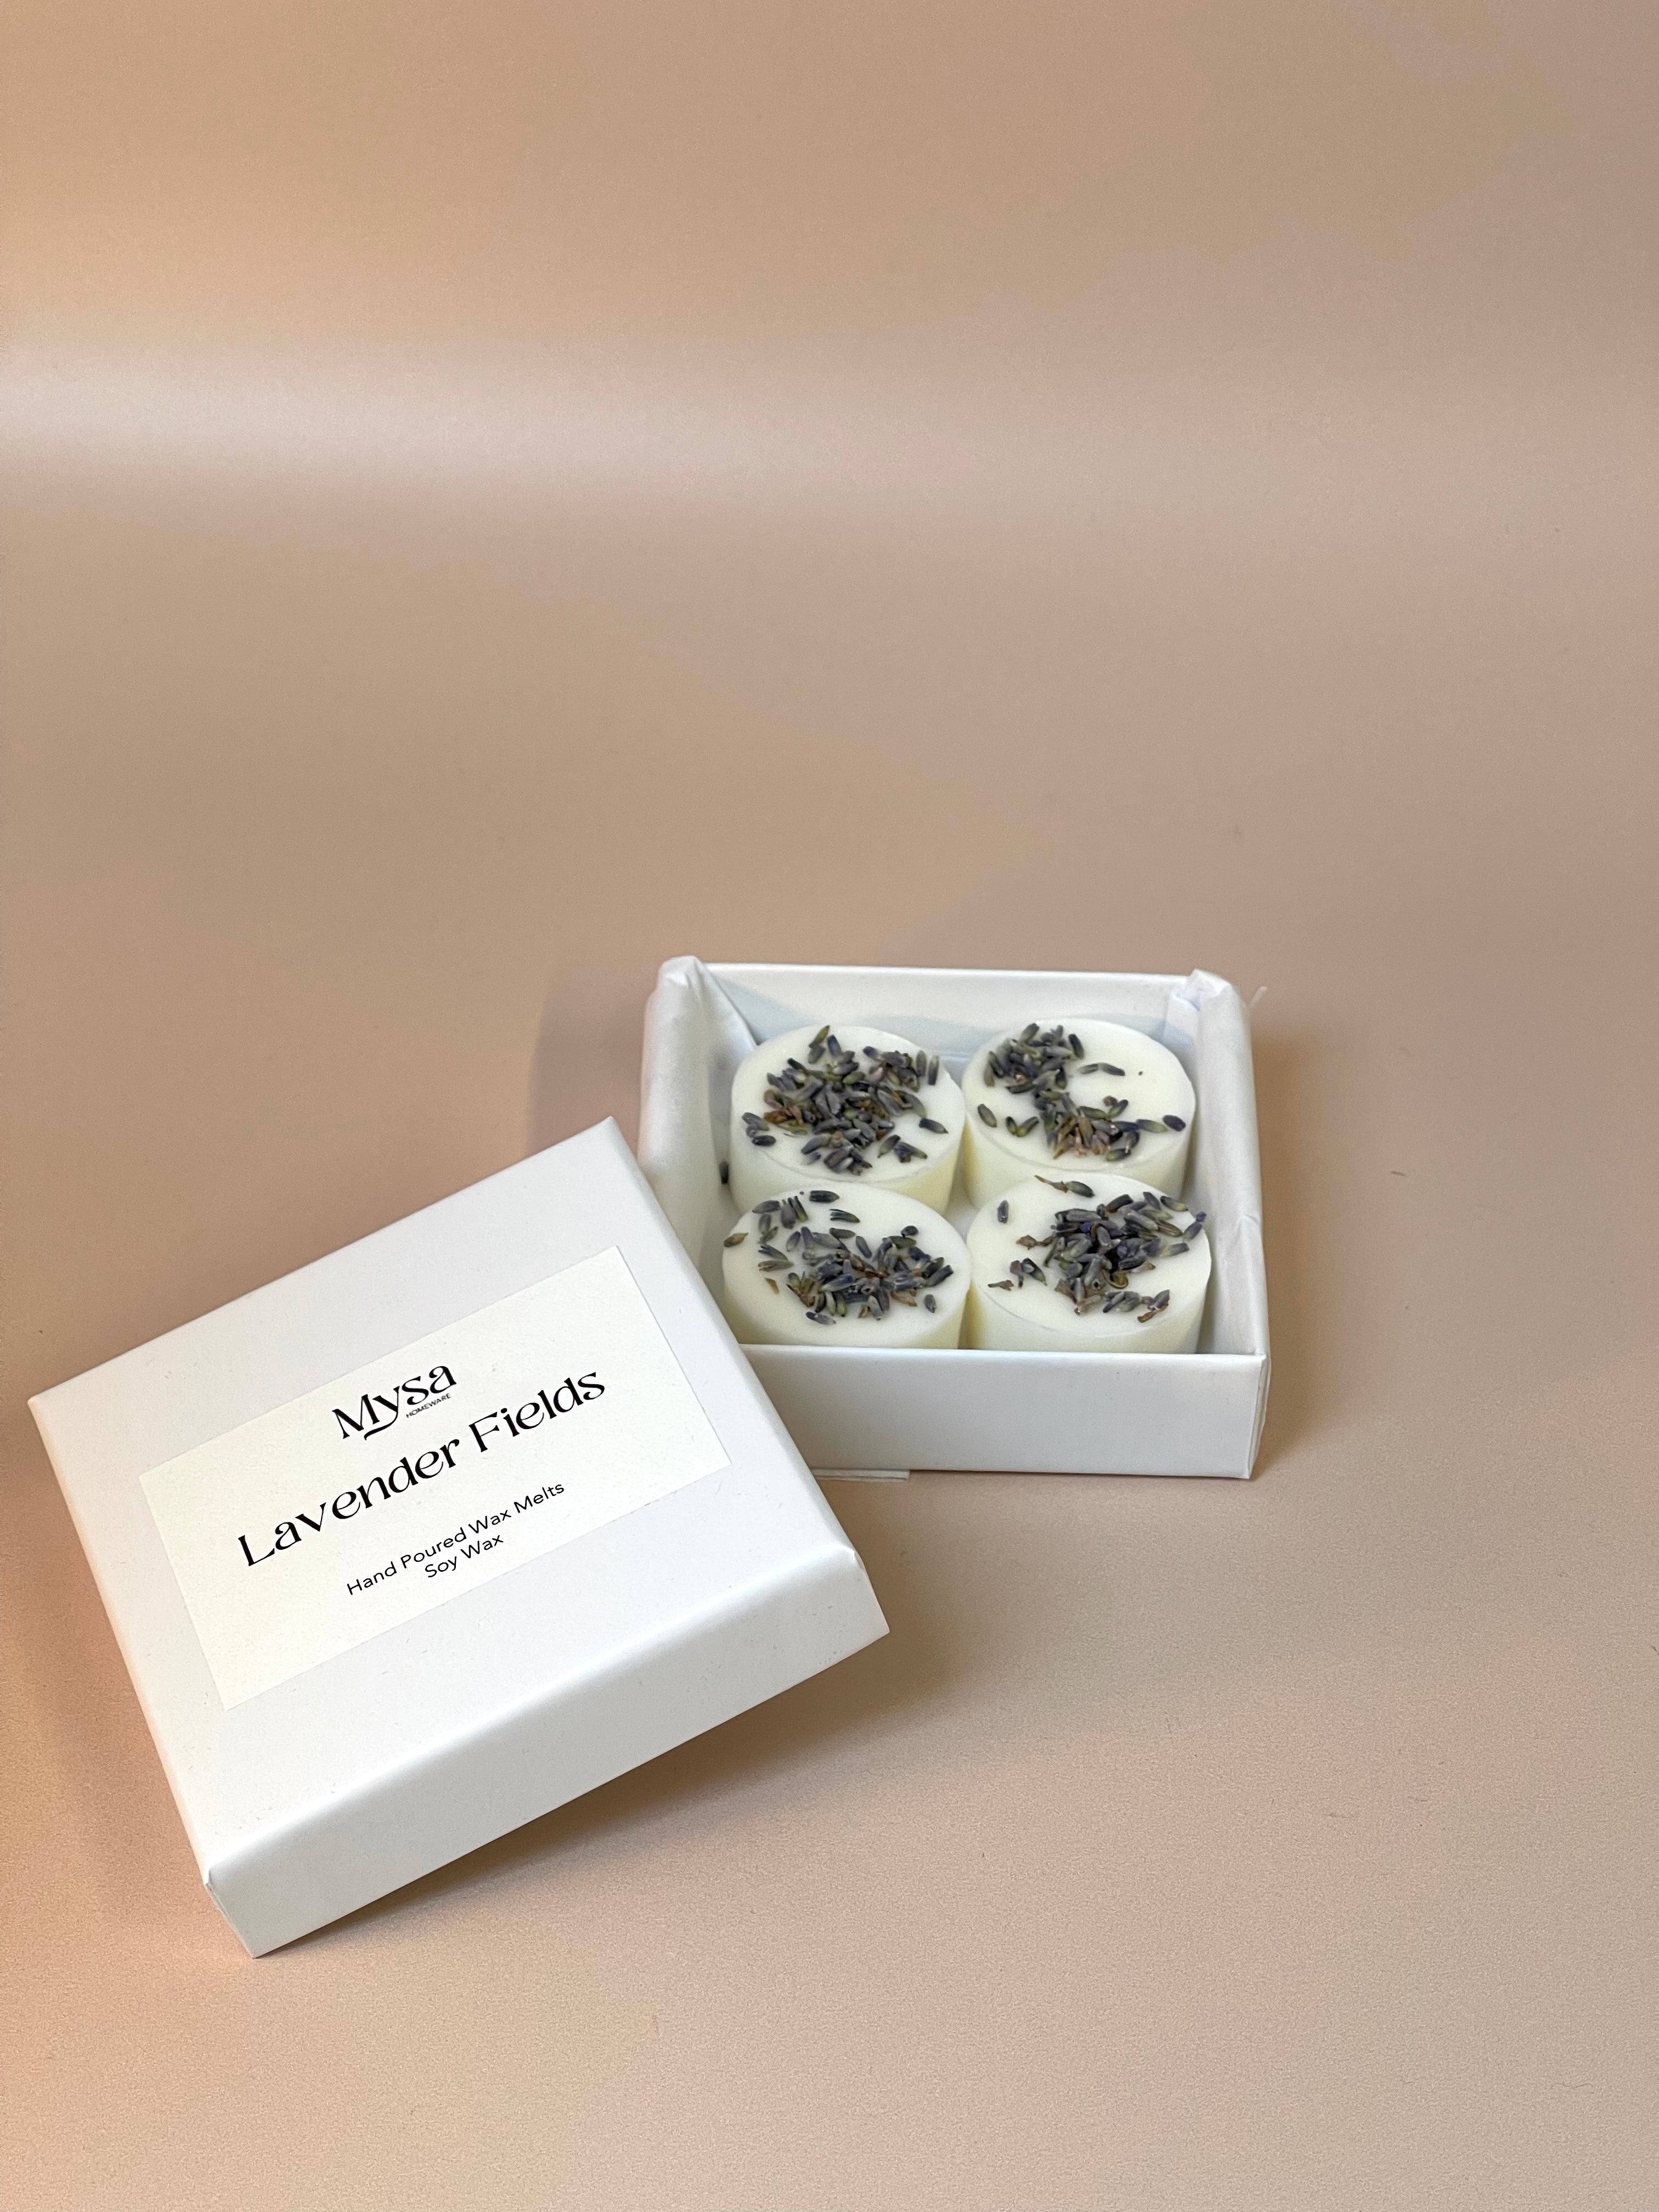 Lavender Fields luxury scented wax melts in gift box, with soy wax and lavender fragrance.